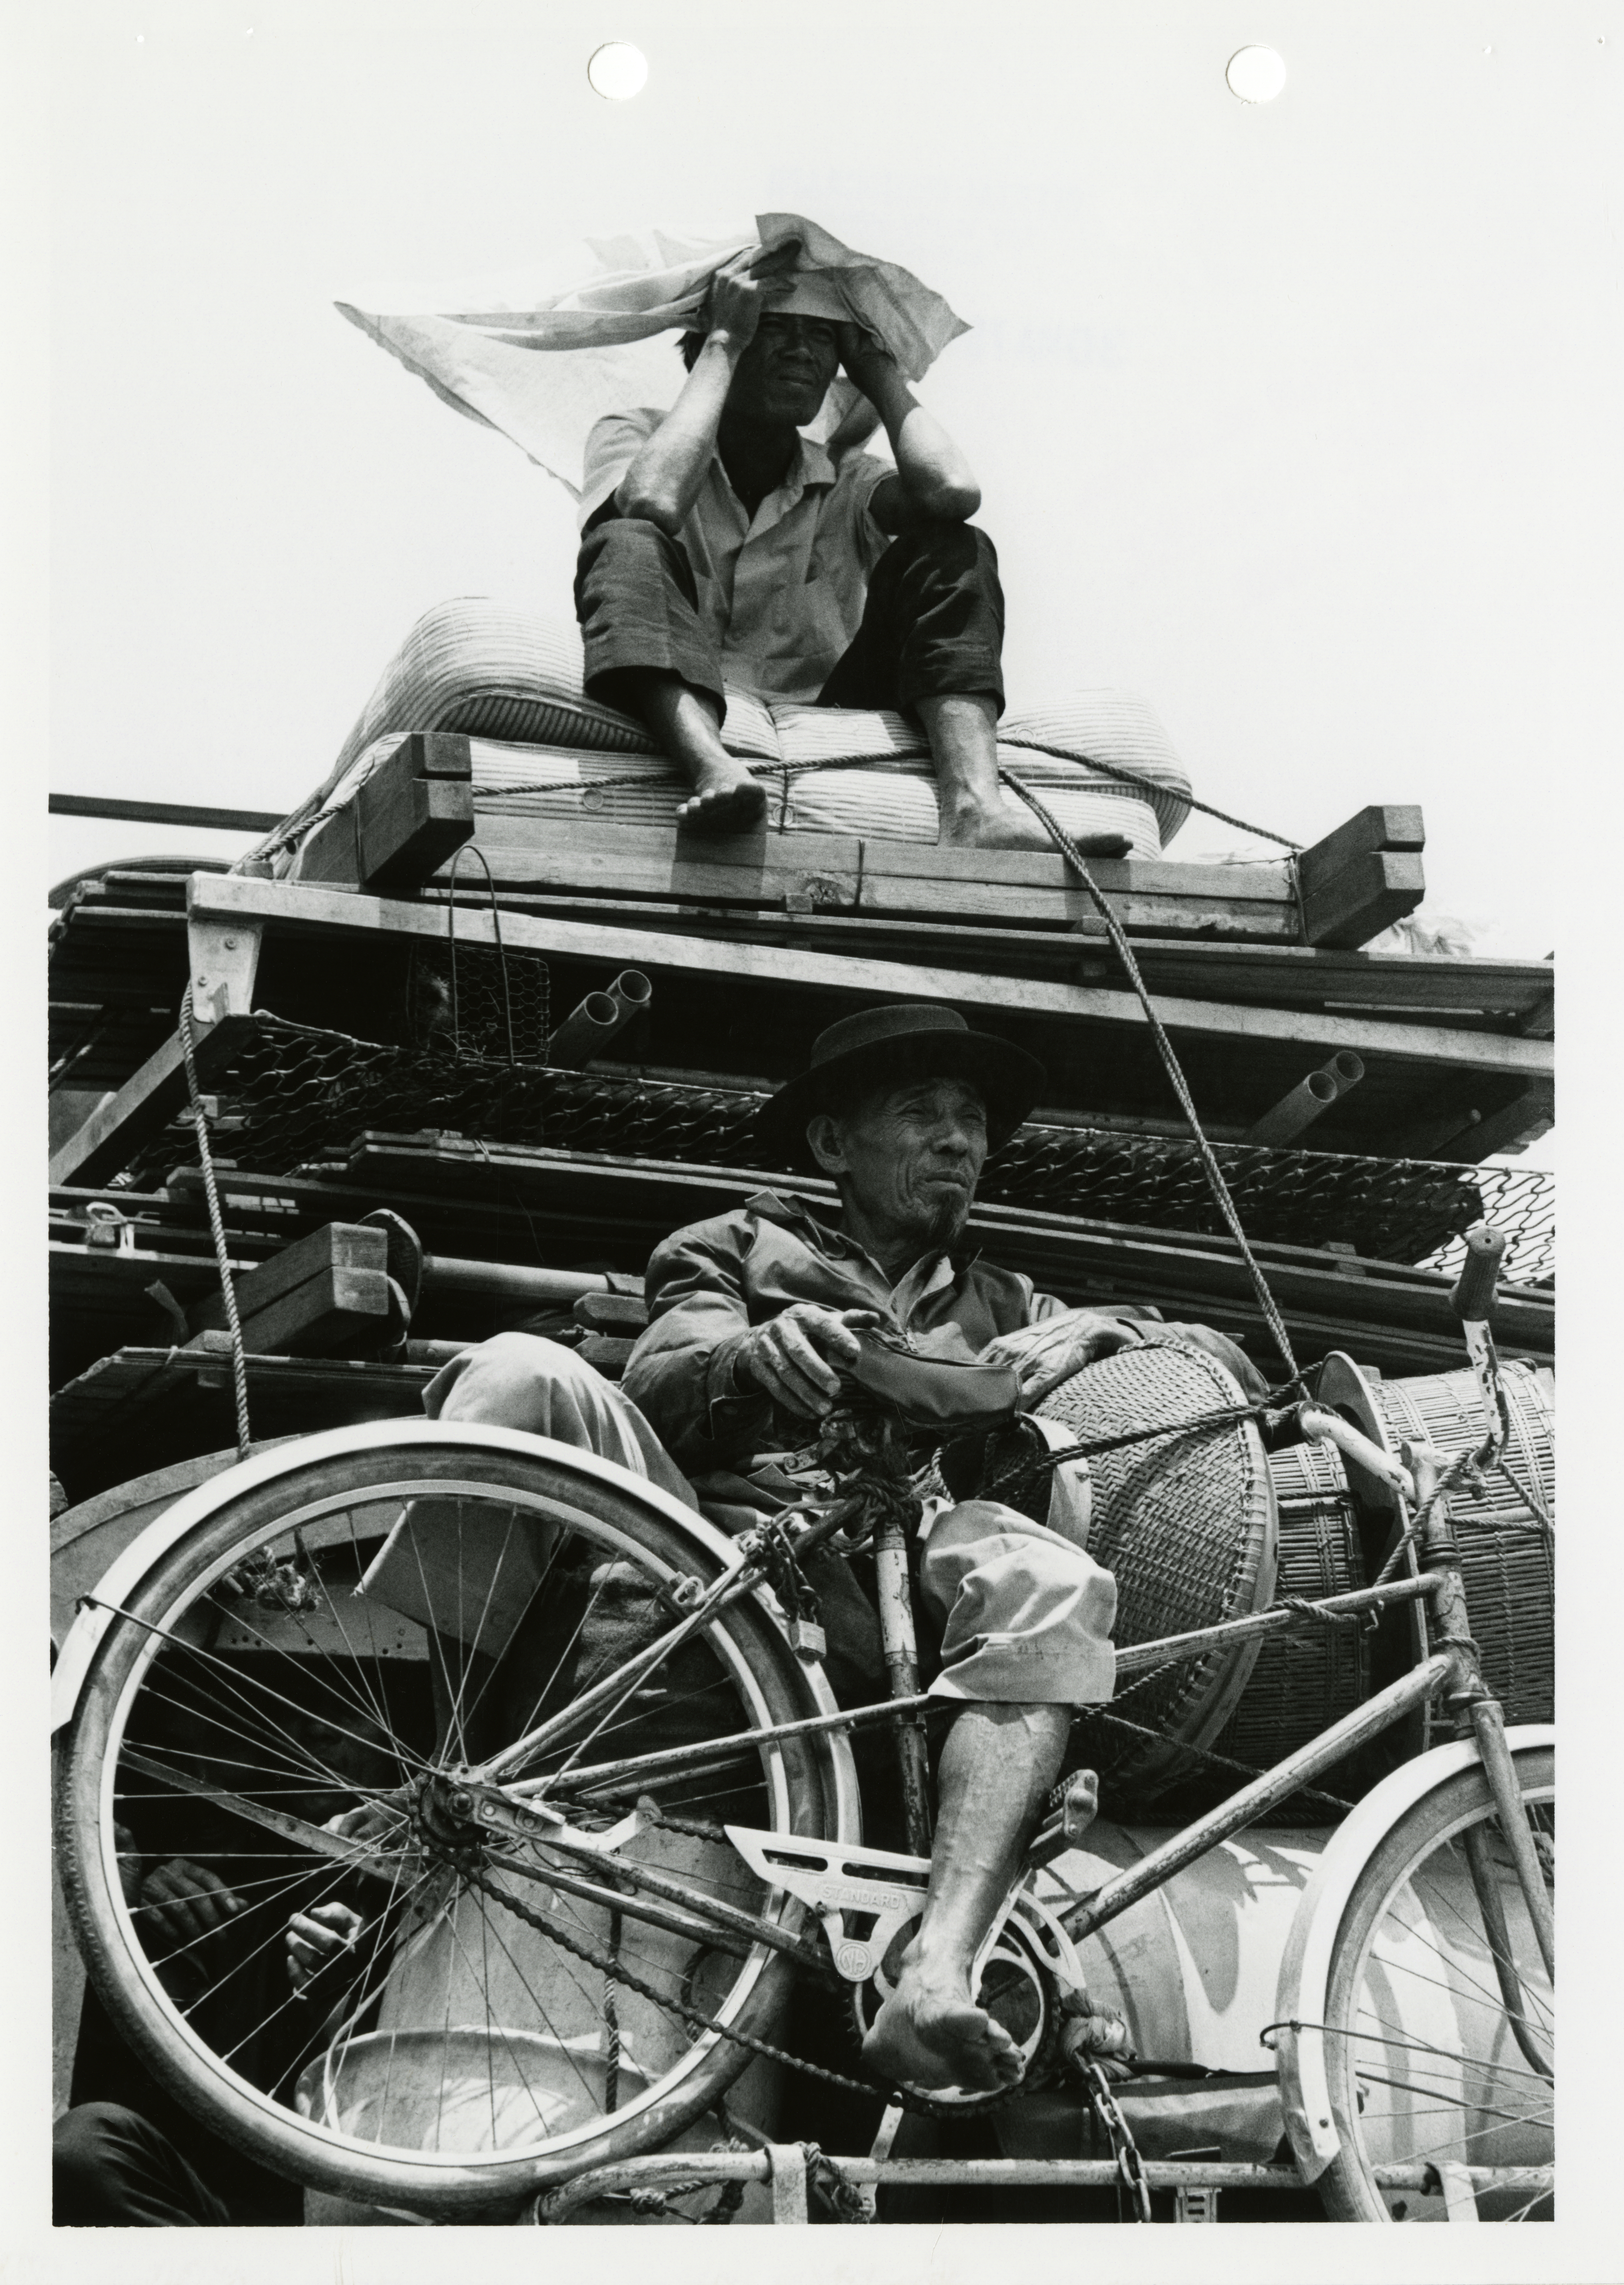 Refugees ride on the back of a truck between Cam Rahn Bay and Nha Trang, South Vietnam.